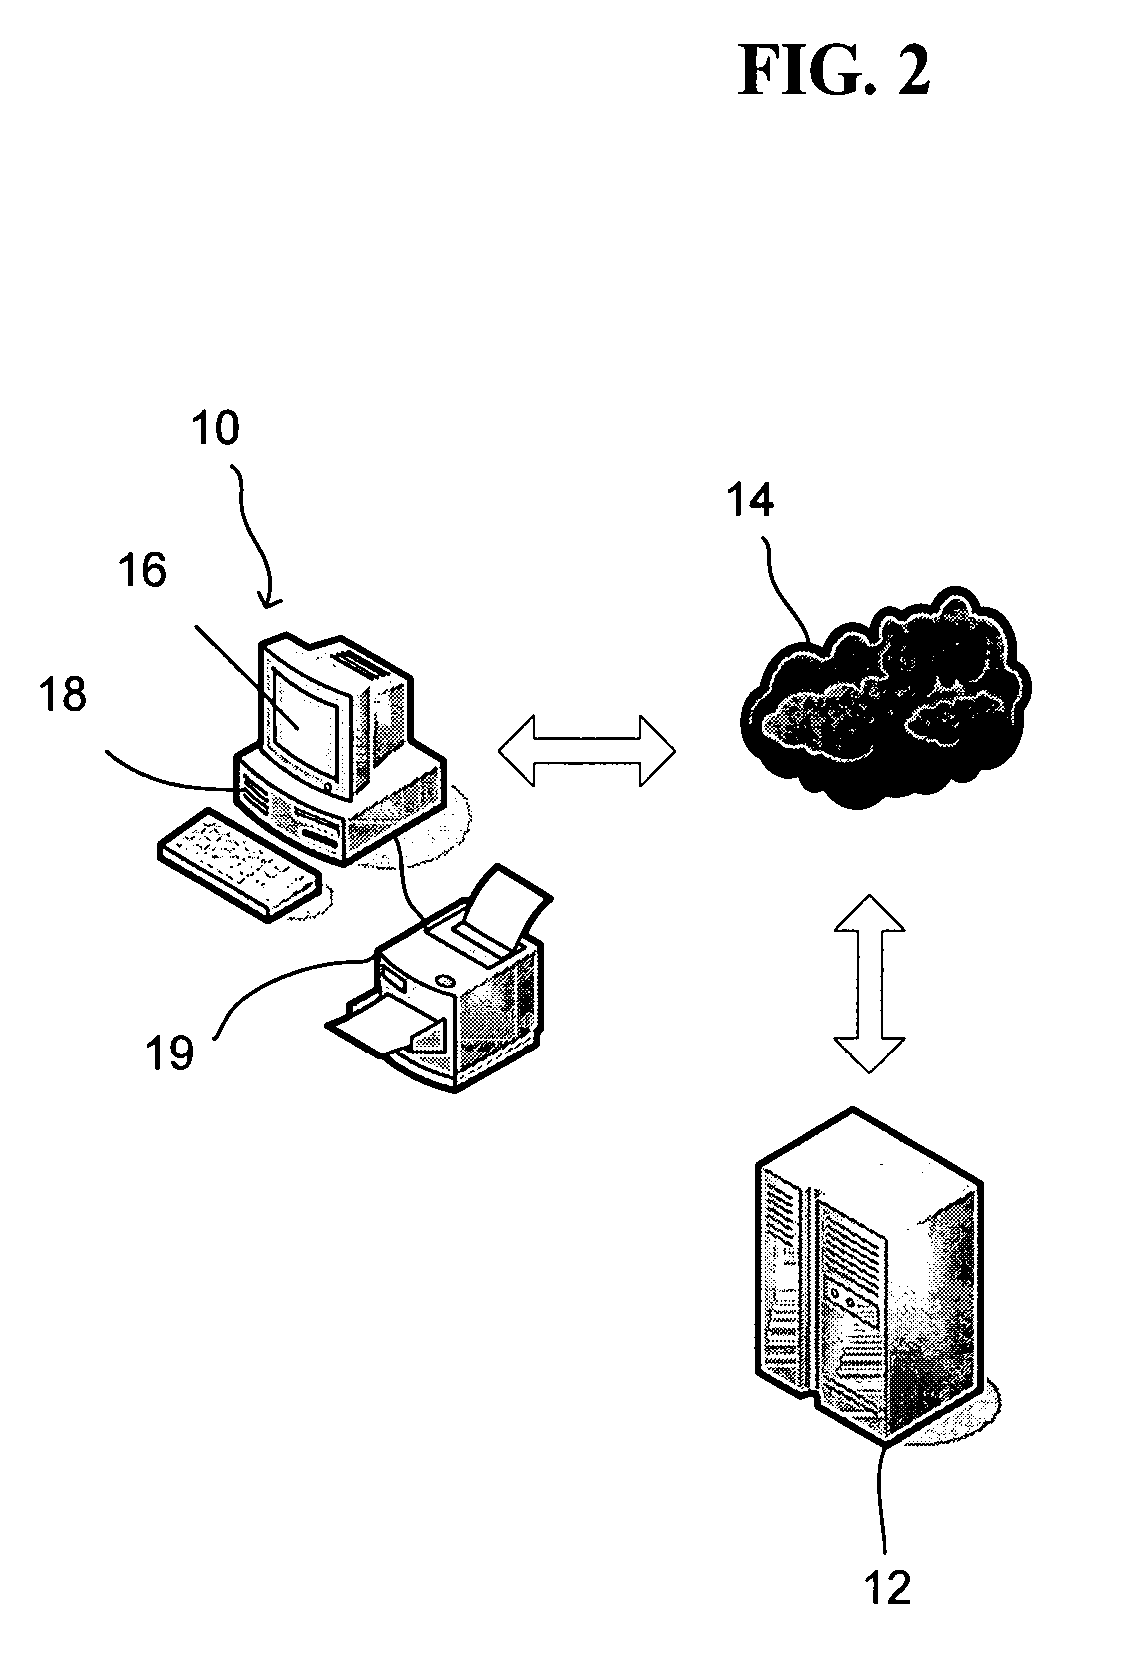 Data backup, storage, transfer, and retrieval system, method and computer program product